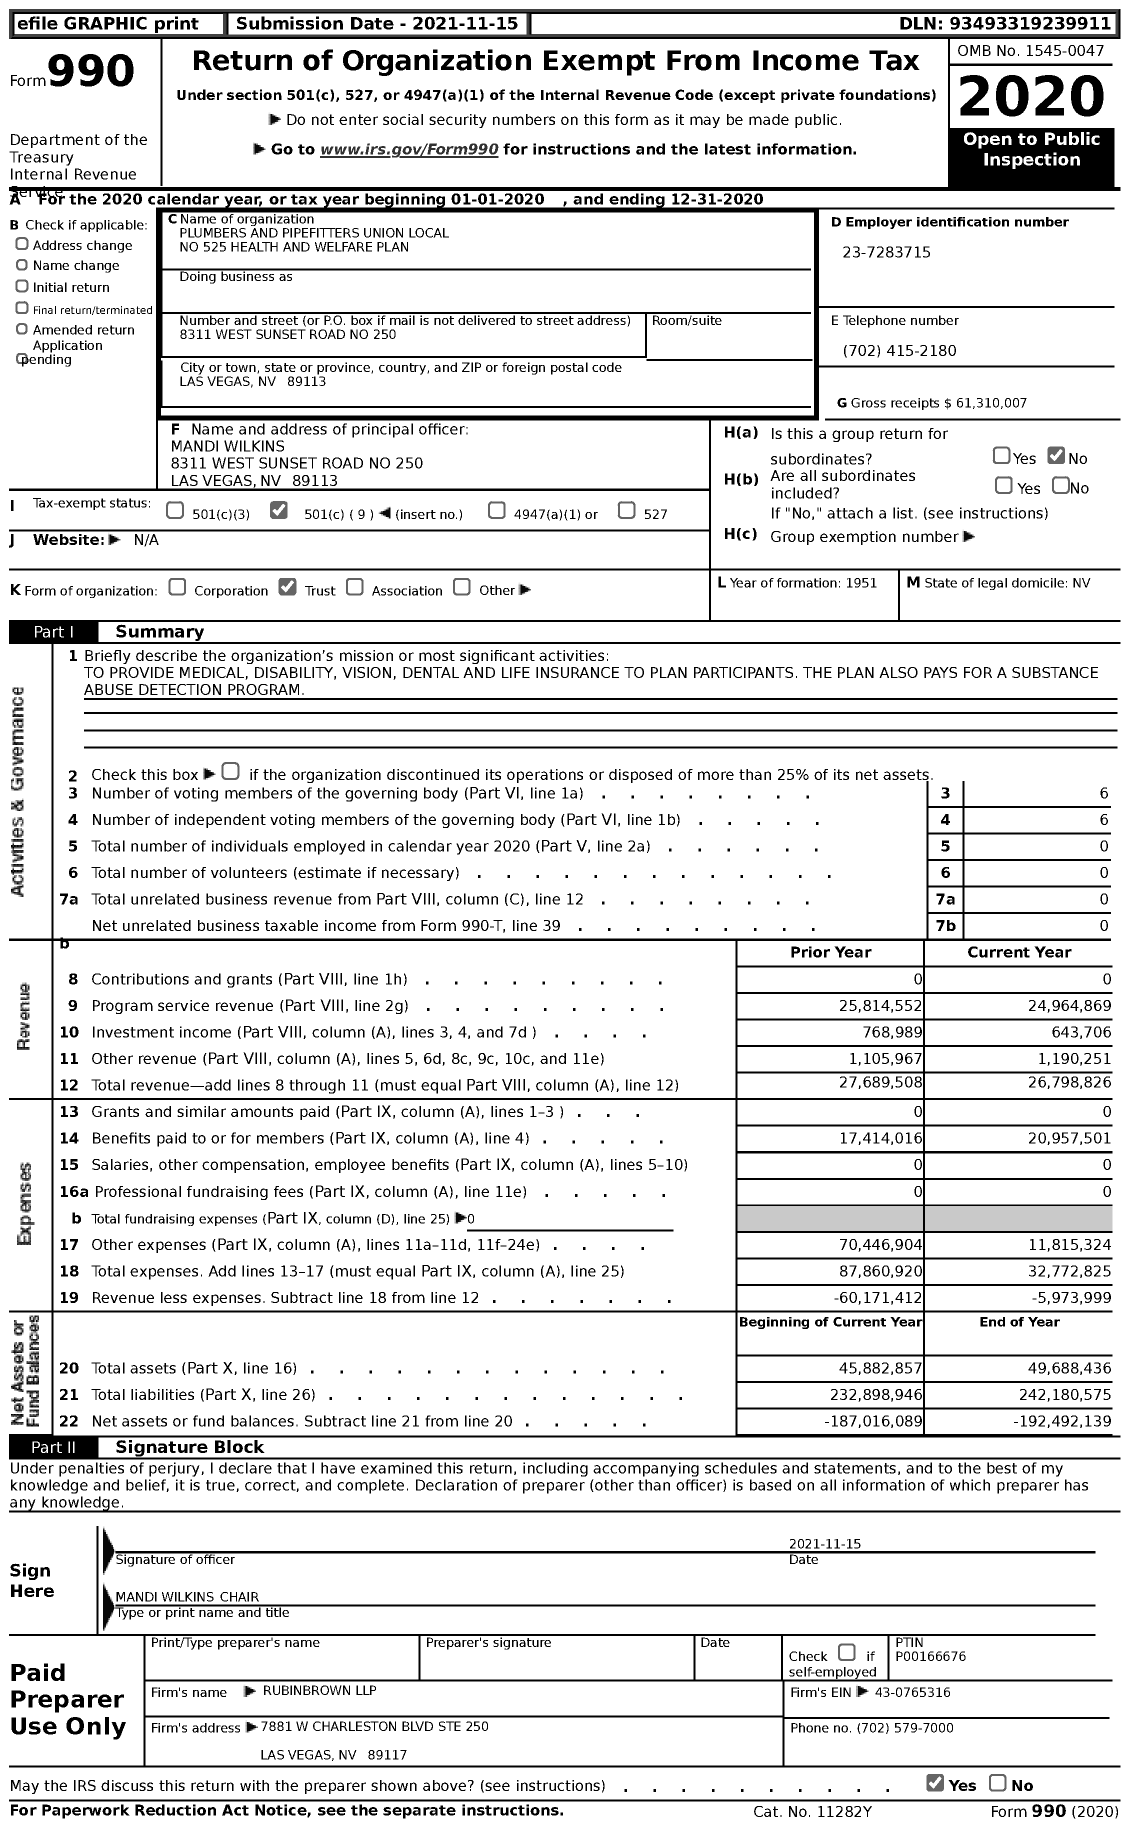 Image of first page of 2020 Form 990 for Plumbers and Pipefitters Union Local No 525 Health and Welfare Plan